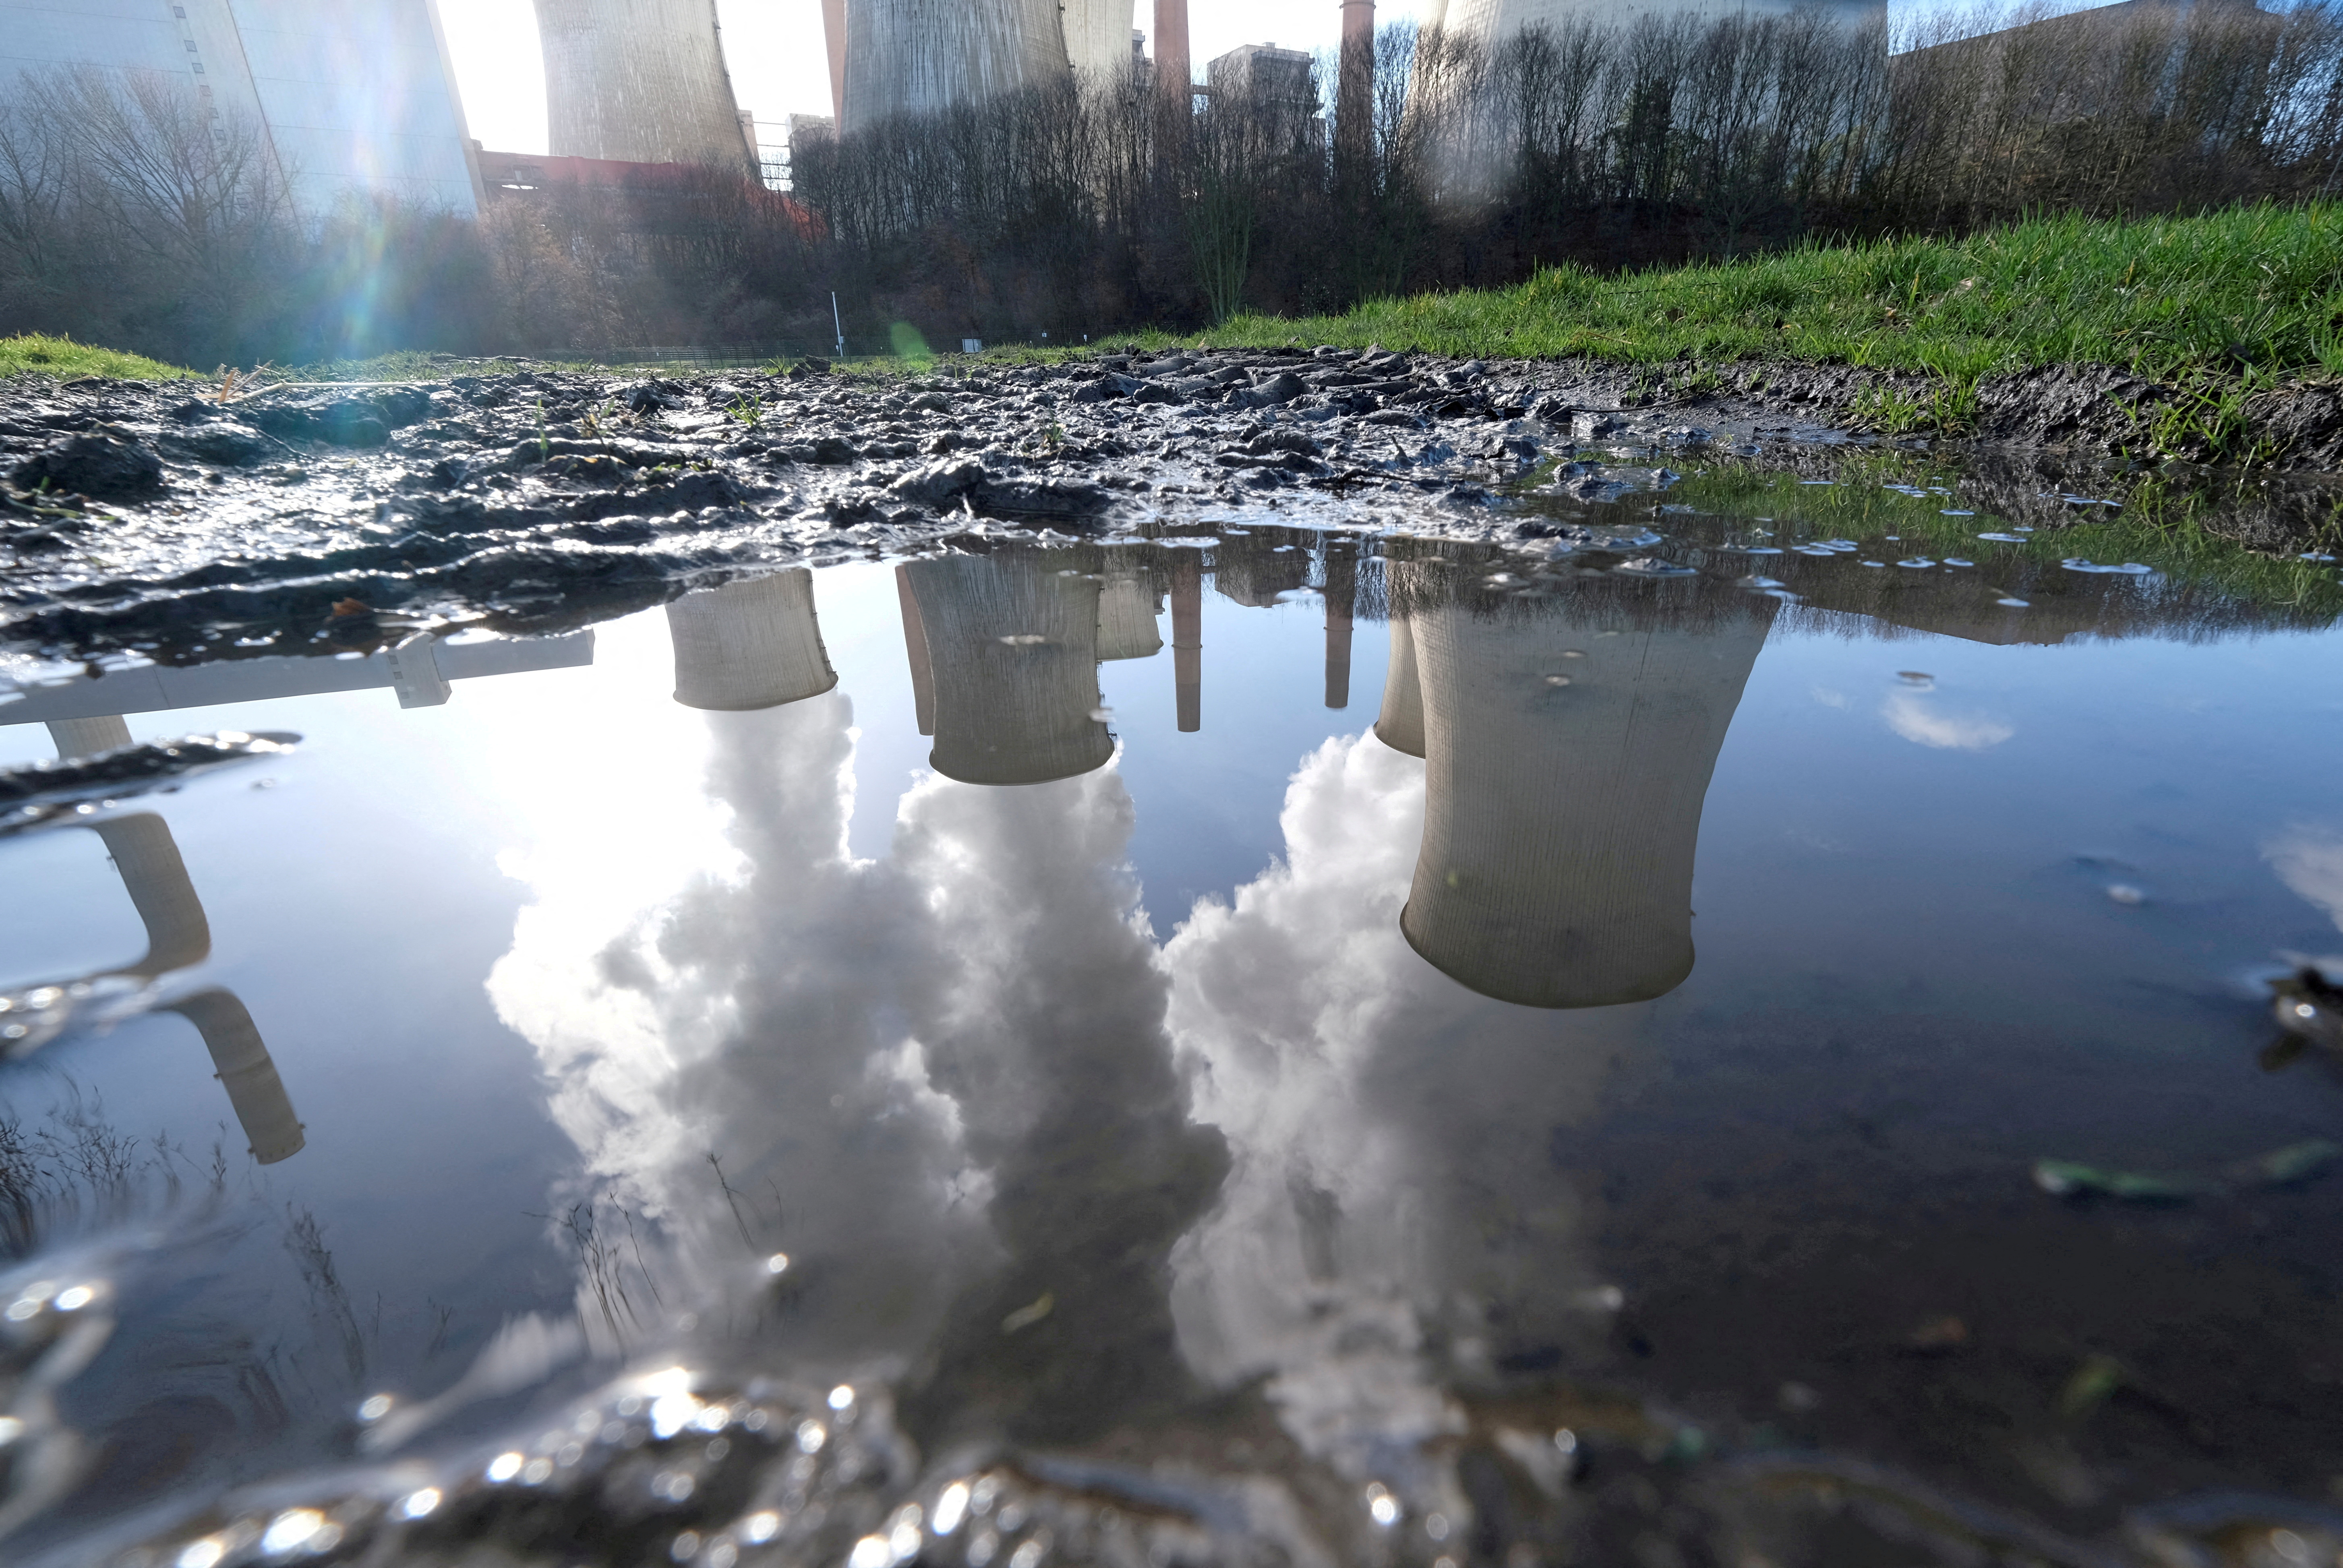 The lignite (brown coal) power plant complex of German energy supplier and utility RWE is reflected in a large puddle in Neurath, northwest of Cologne, Germany